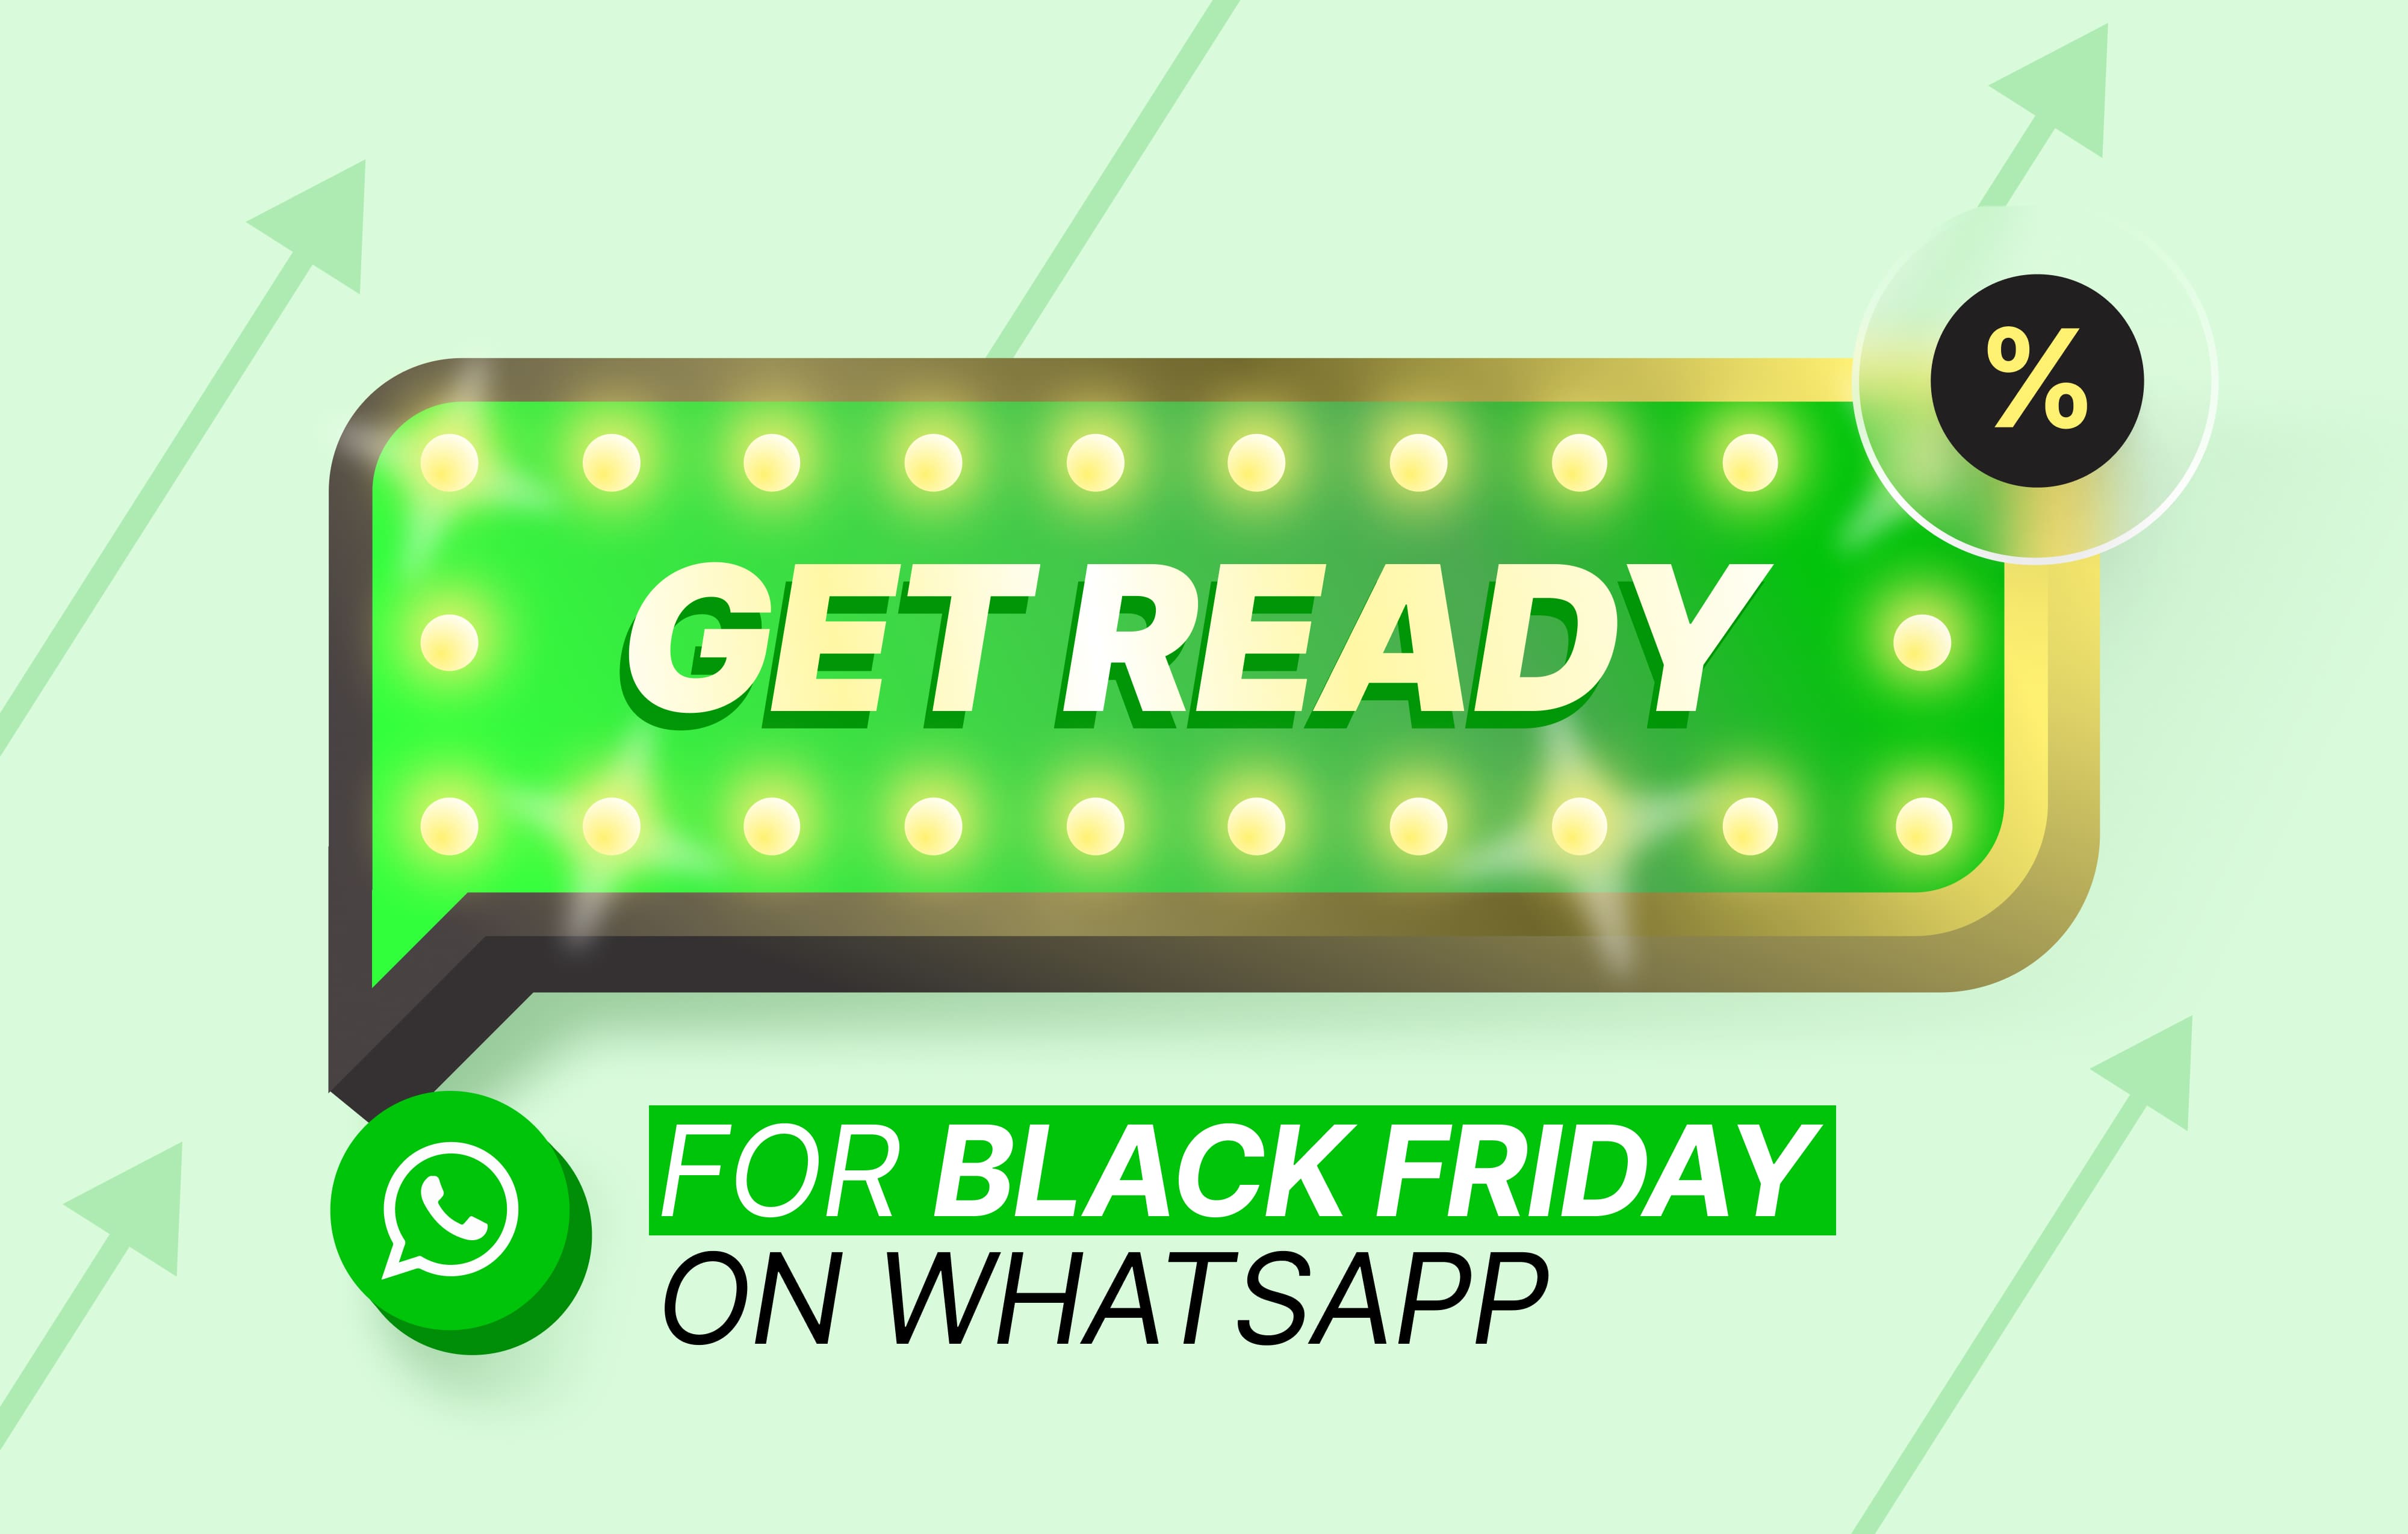 5 steps to get WhatsApp ready for Black Friday.